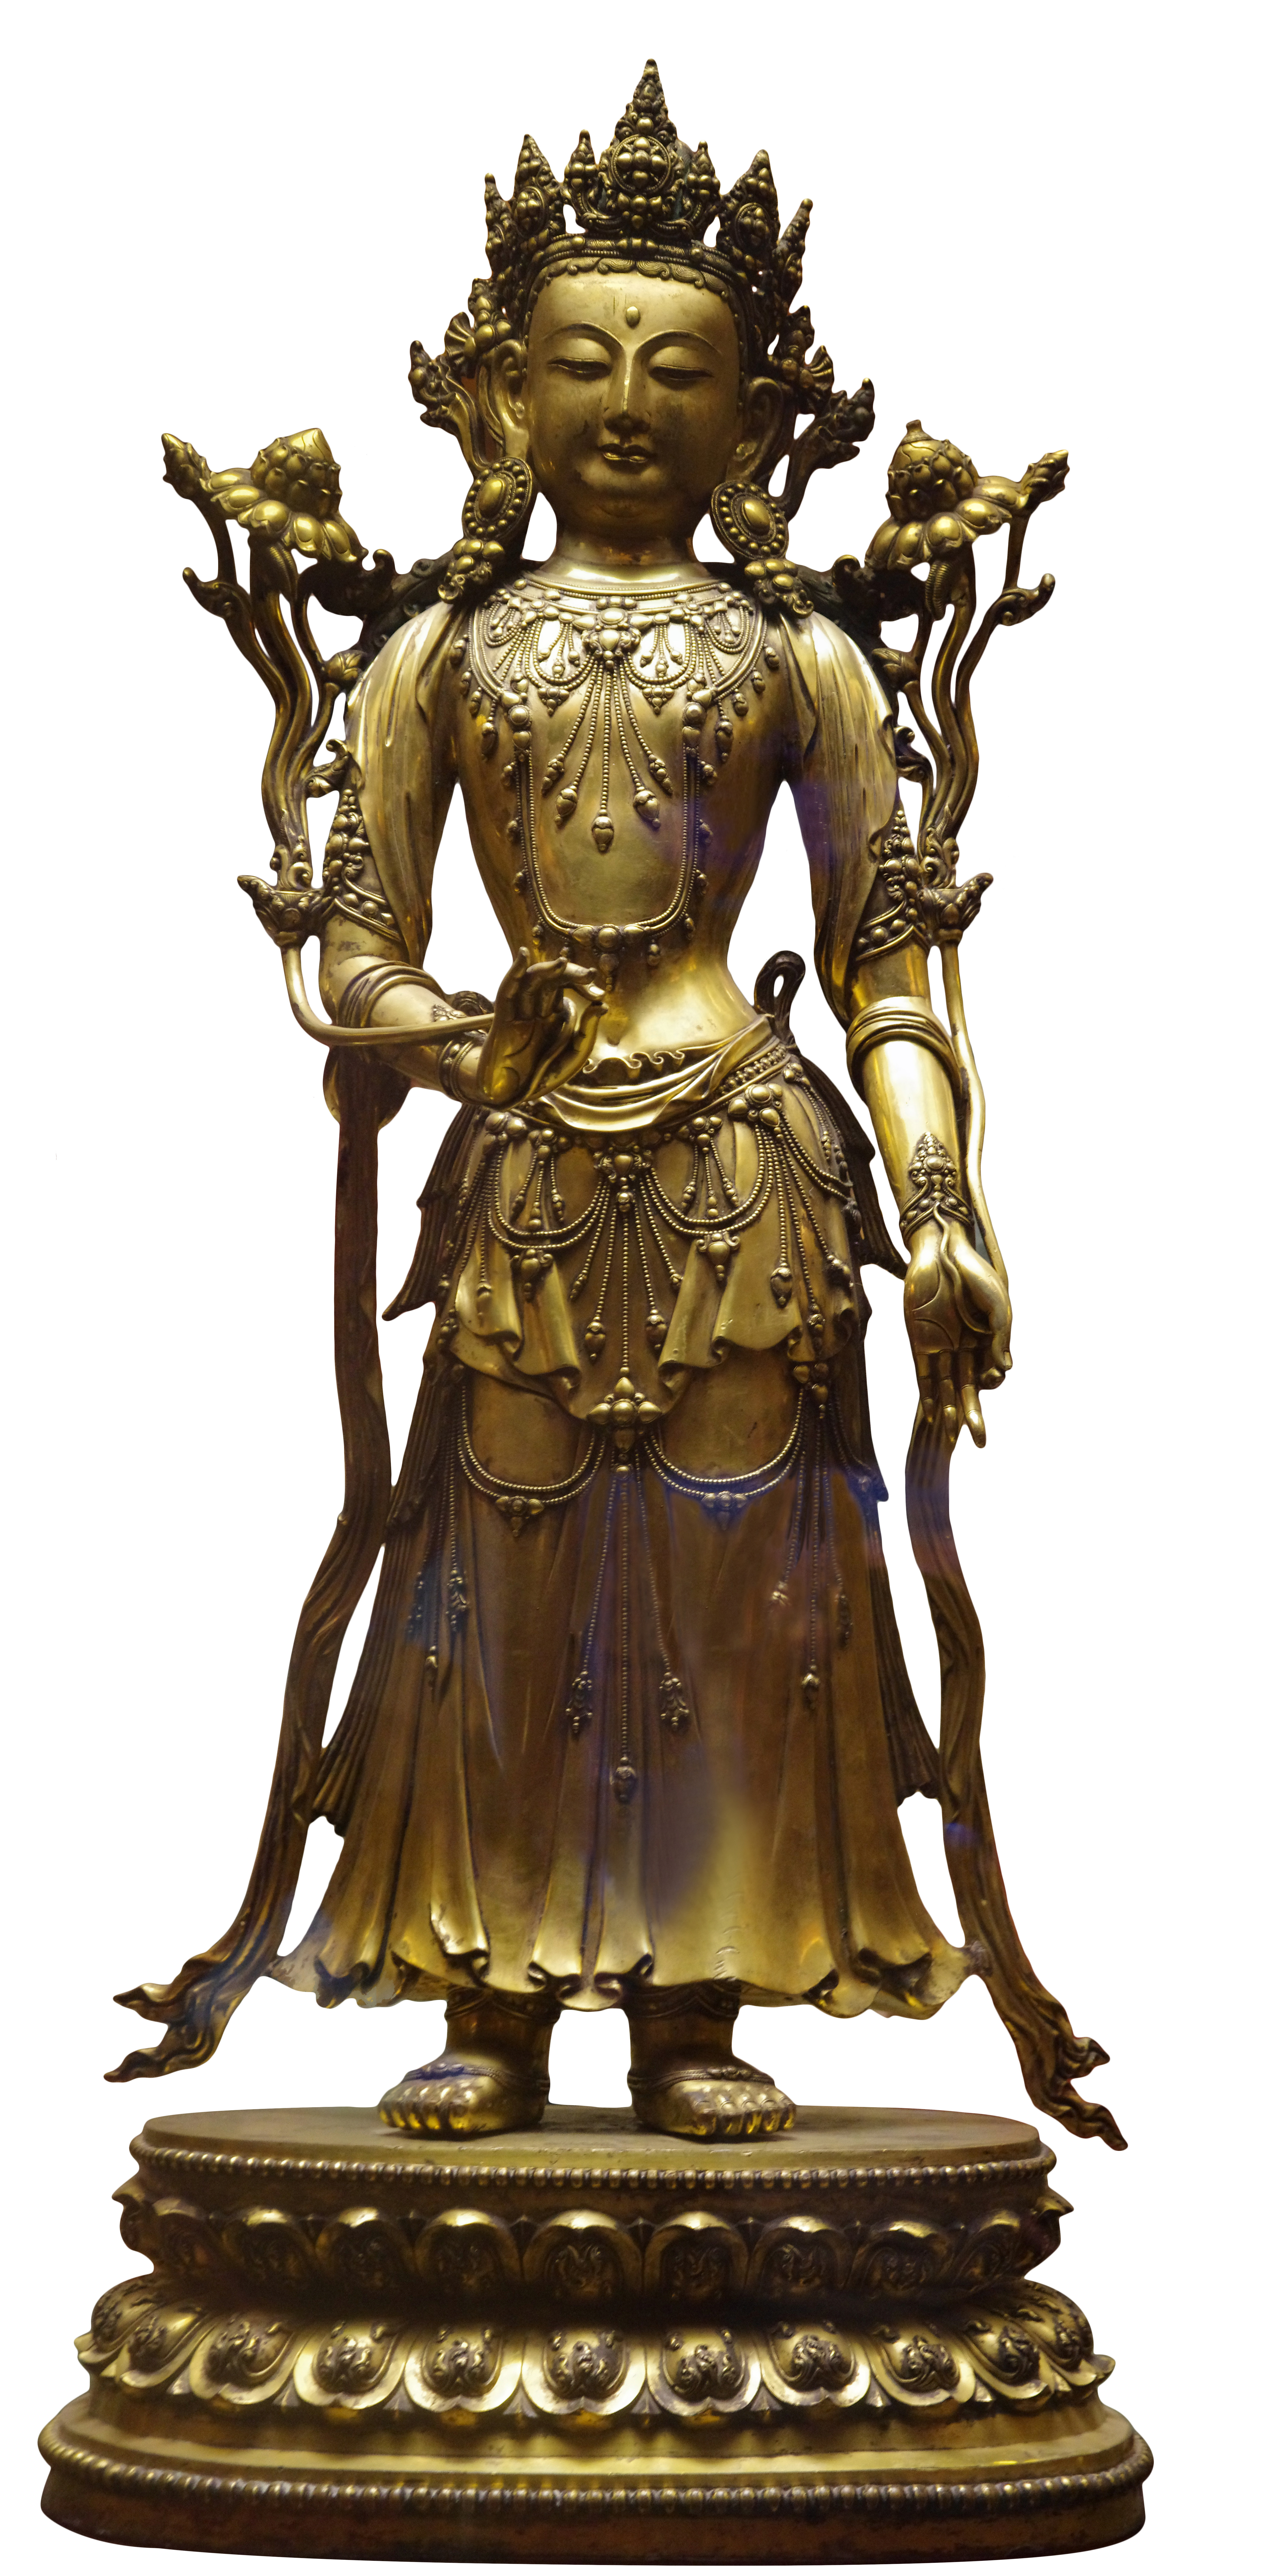 Gilded statue depicting Bodhisattva wearing flowing skirt and elaborate accessories standing between two long-stemmed blossoms